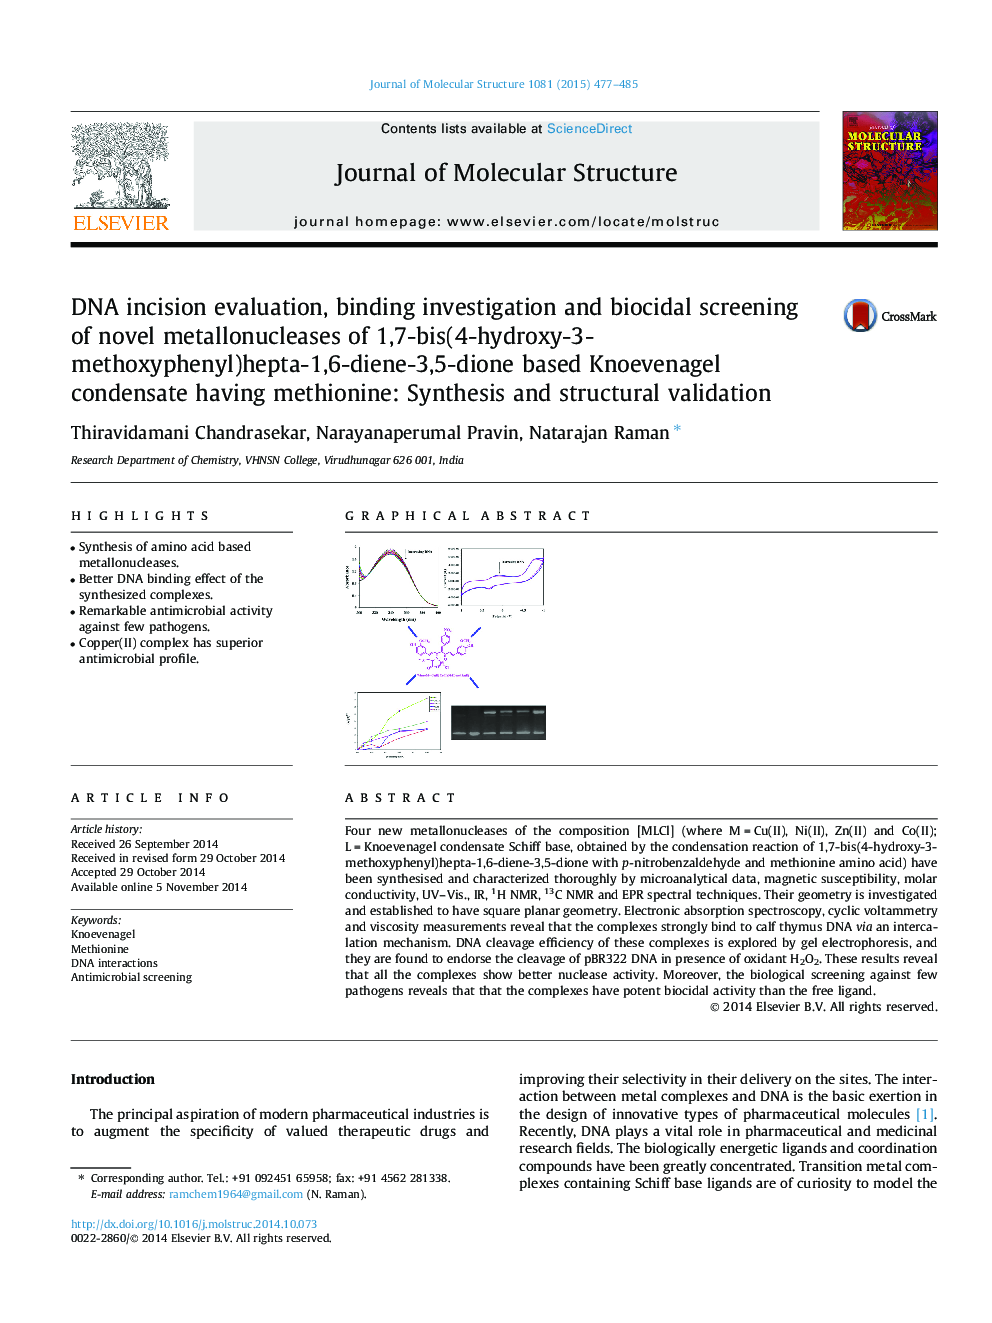 DNA incision evaluation, binding investigation and biocidal screening of novel metallonucleases of 1,7-bis(4-hydroxy-3-methoxyphenyl)hepta-1,6-diene-3,5-dione based Knoevenagel condensate having methionine: Synthesis and structural validation